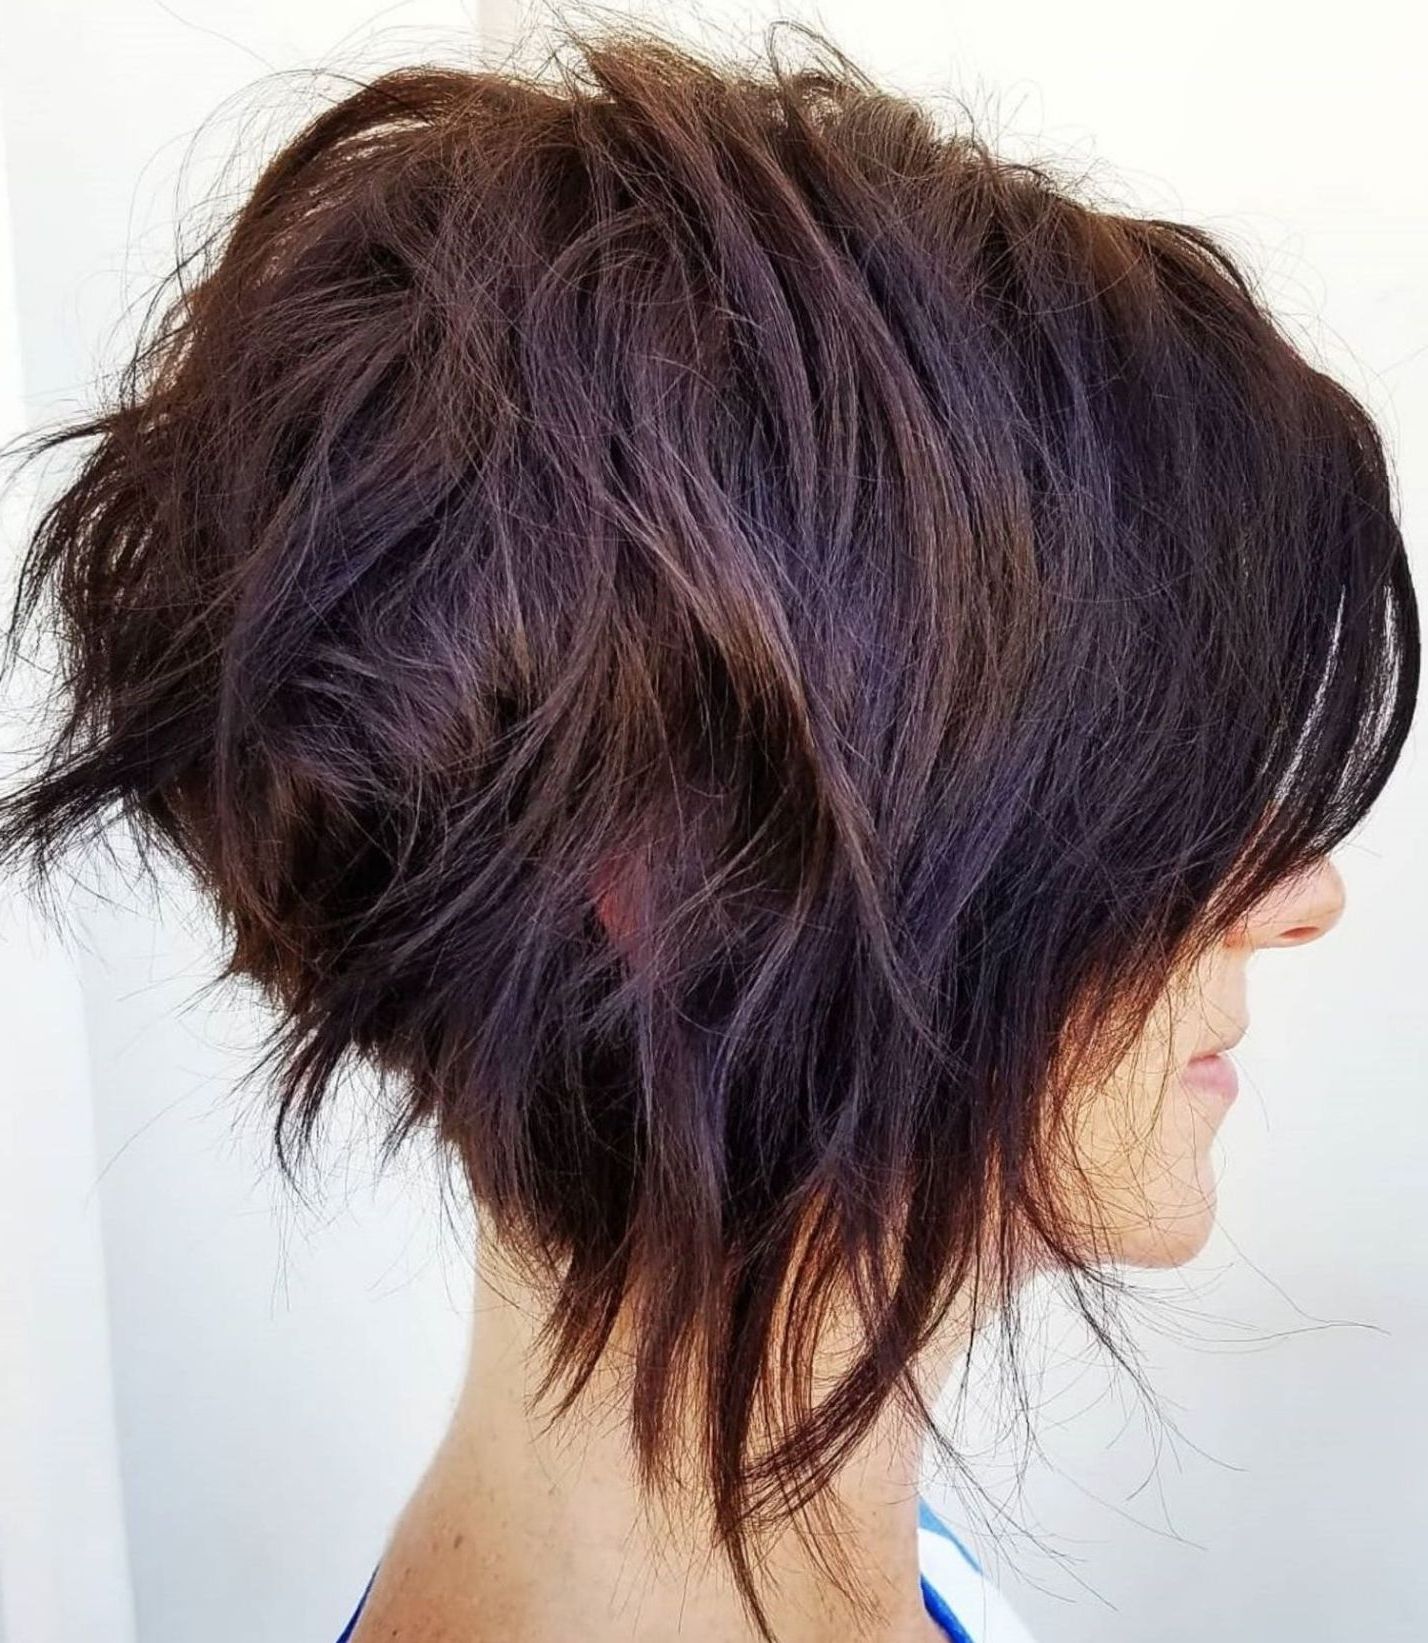 60 Classy Short Haircuts And Hairstyles For Thick Hair In 2018 Regarding Popular Uneven Layered Bob Hairstyles For Thick Hair (View 1 of 20)